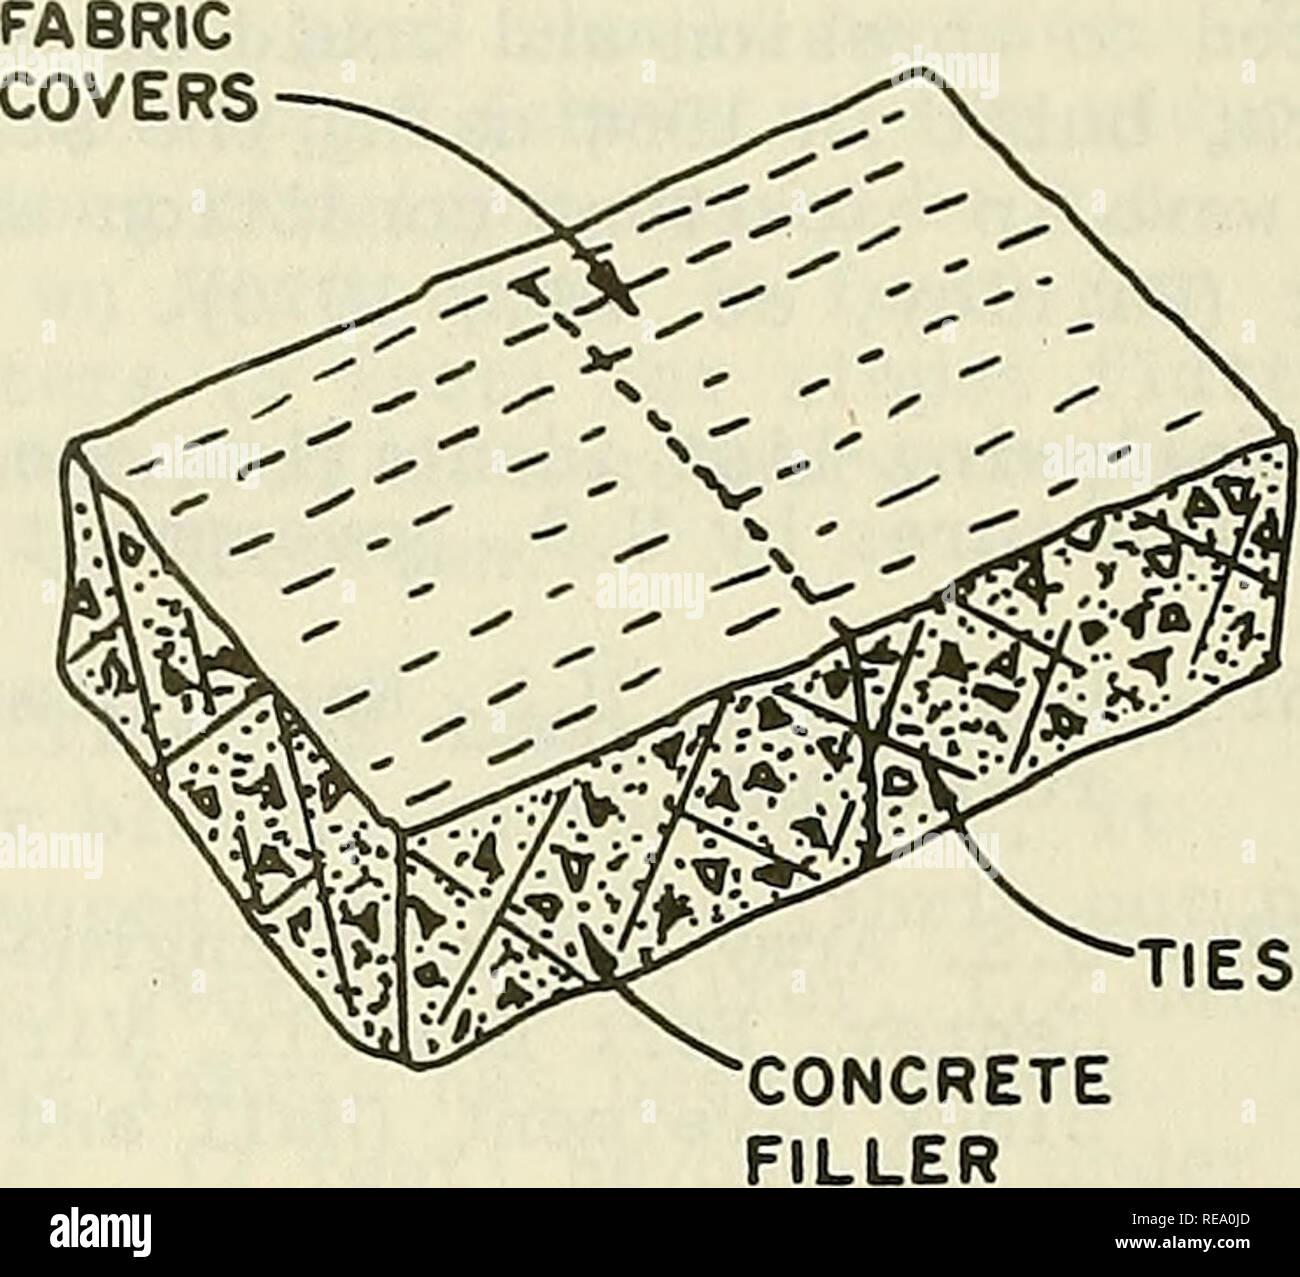 . Construction materials for coastal structures. Coastal engineering; Building materials. CONCRETE FILLER. Figure 83. Two types of double layer fabric forms (courtesy of Fabriform). Grout-filled fabric tubes may be arranged in various configurations along the shoreline. They are useful as groins, dikes, breakwaters or weirs. Figure 85 shows an arrangement of tubes and a filling point. Figure 86 shows the use of fabric pillows as concrete forms for erosion control. Koerner and Welsh (1980) give examples of slab and tube forms. b. Sheet Forms. Synthetic sheet materials made of polyethylene, viny Stock Photo